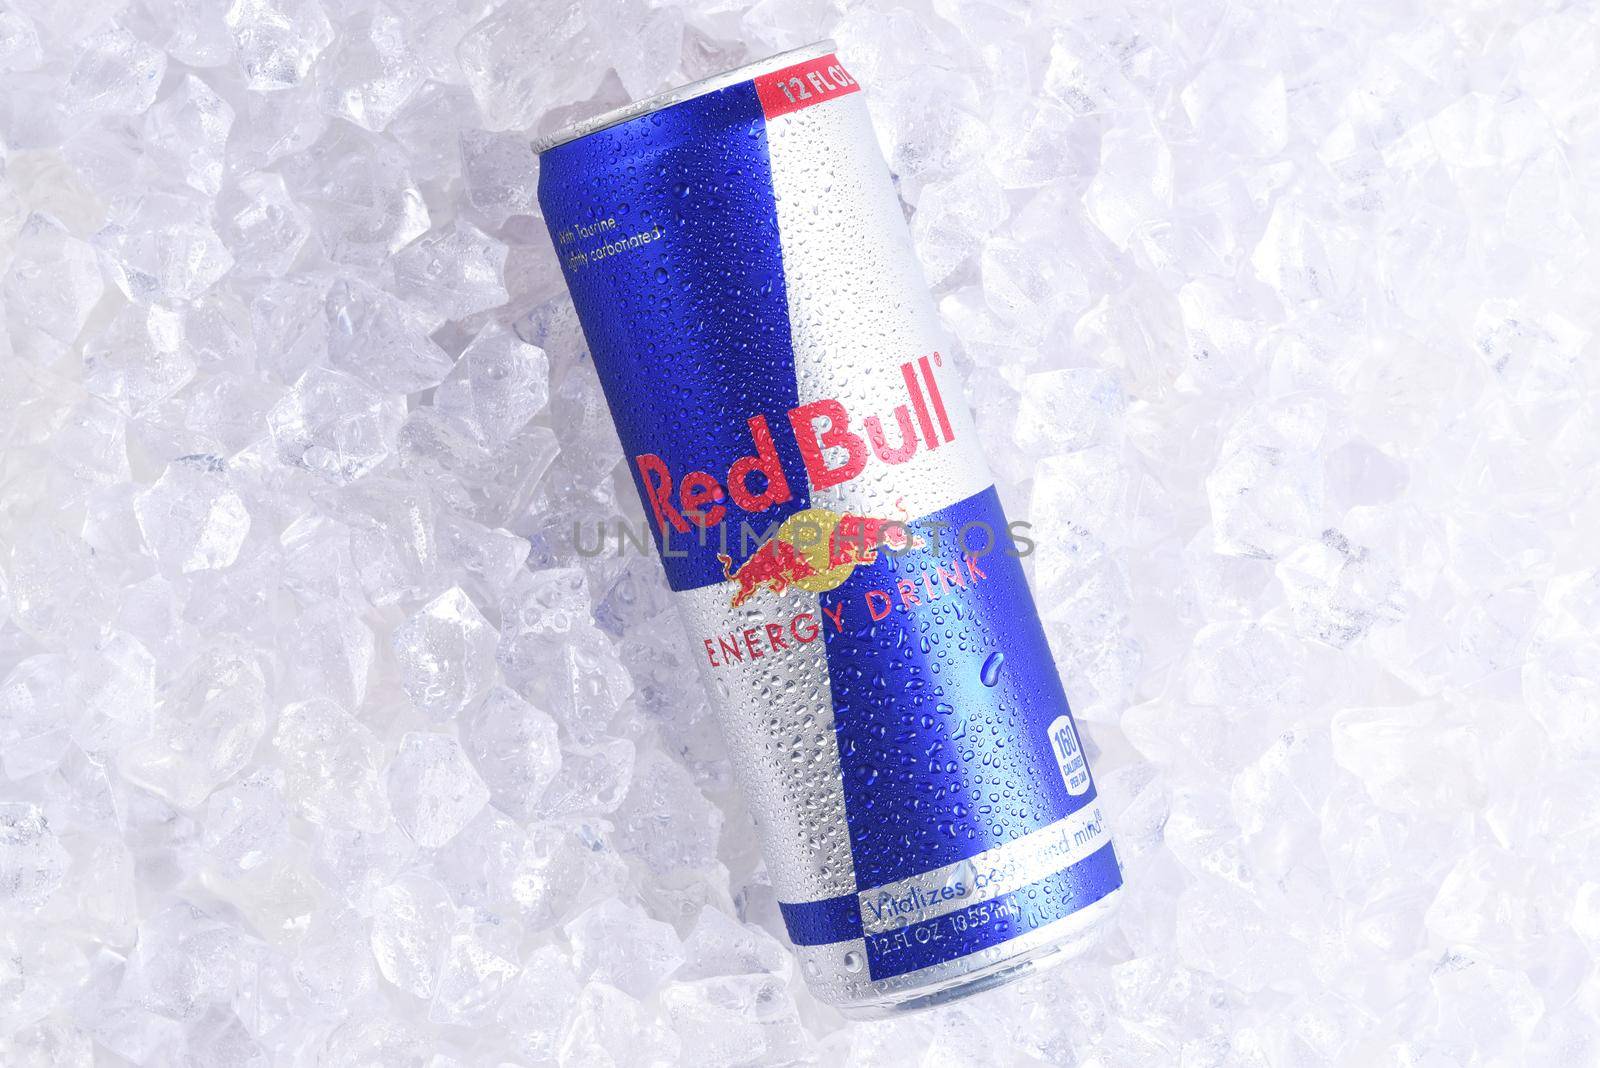 IRVINE, CALIFORNIA - MAY 23, 2018: A single can of Red Bull Energy Drink on ice. Red Bull is the most popular energy drink in the world.